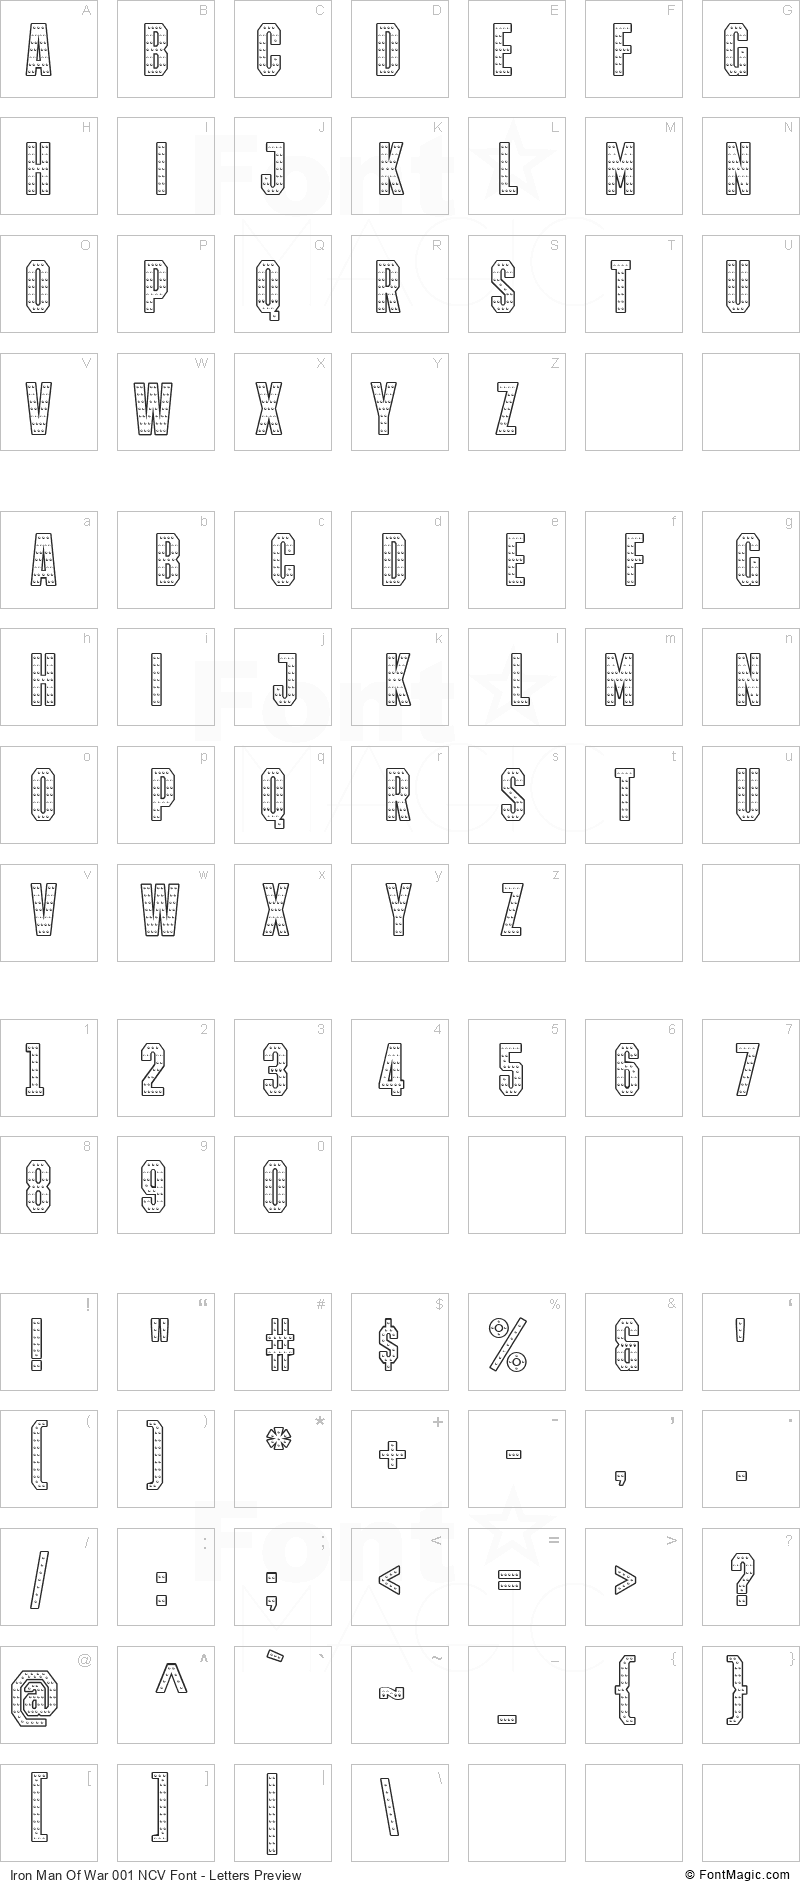 Iron Man Of War 001 NCV Font - All Latters Preview Chart